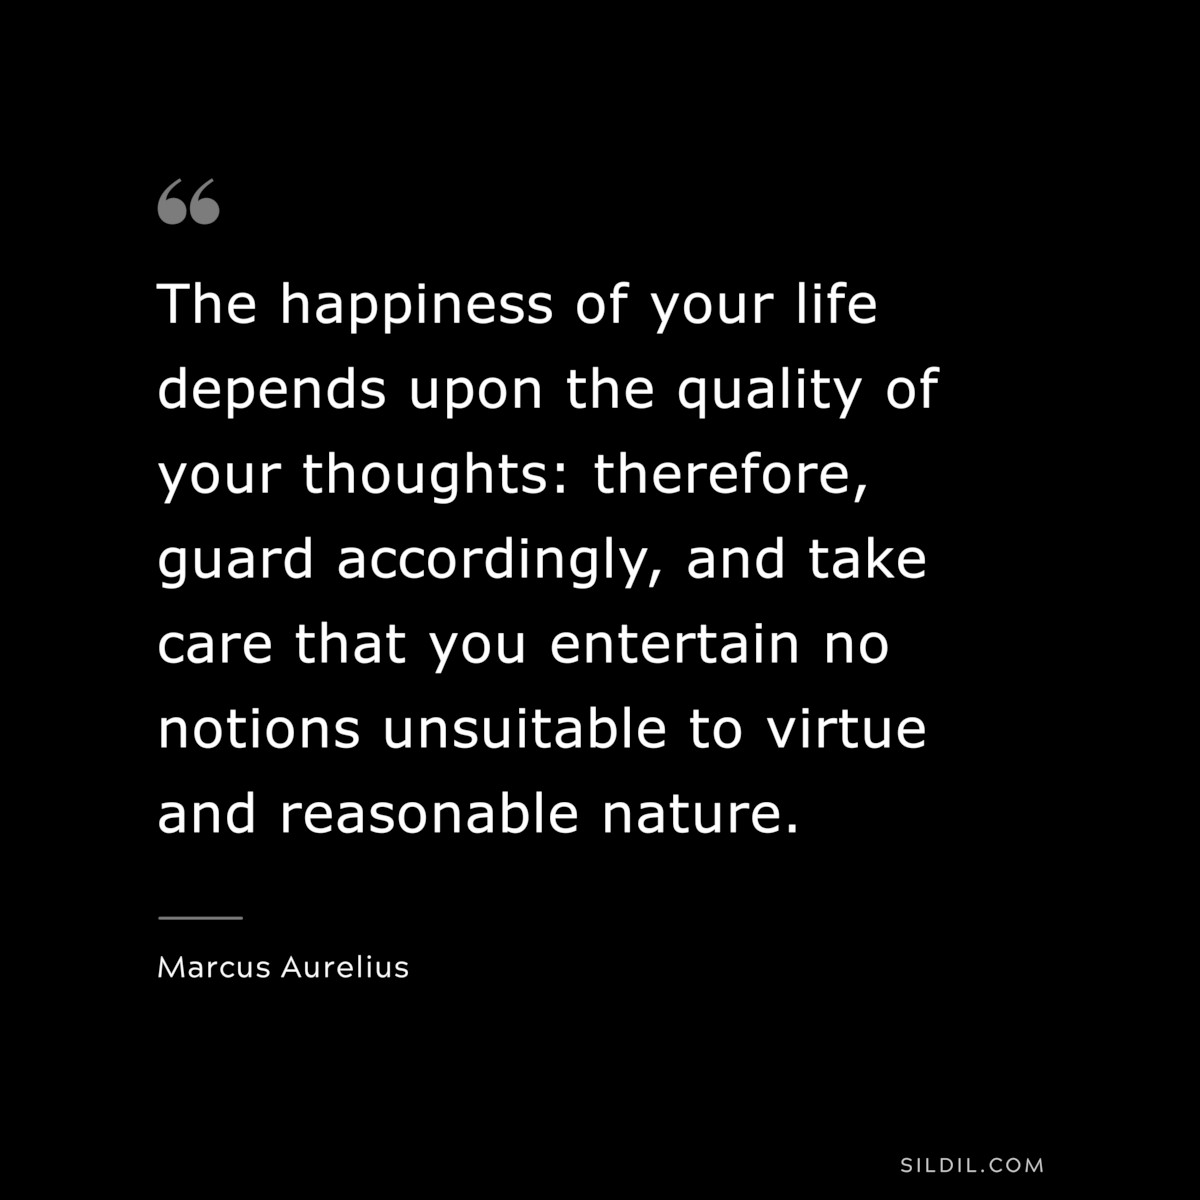 The happiness of your life depends upon the quality of your thoughts: therefore, guard accordingly, and take care that you entertain no notions unsuitable to virtue and reasonable nature. ― Marcus Aurelius